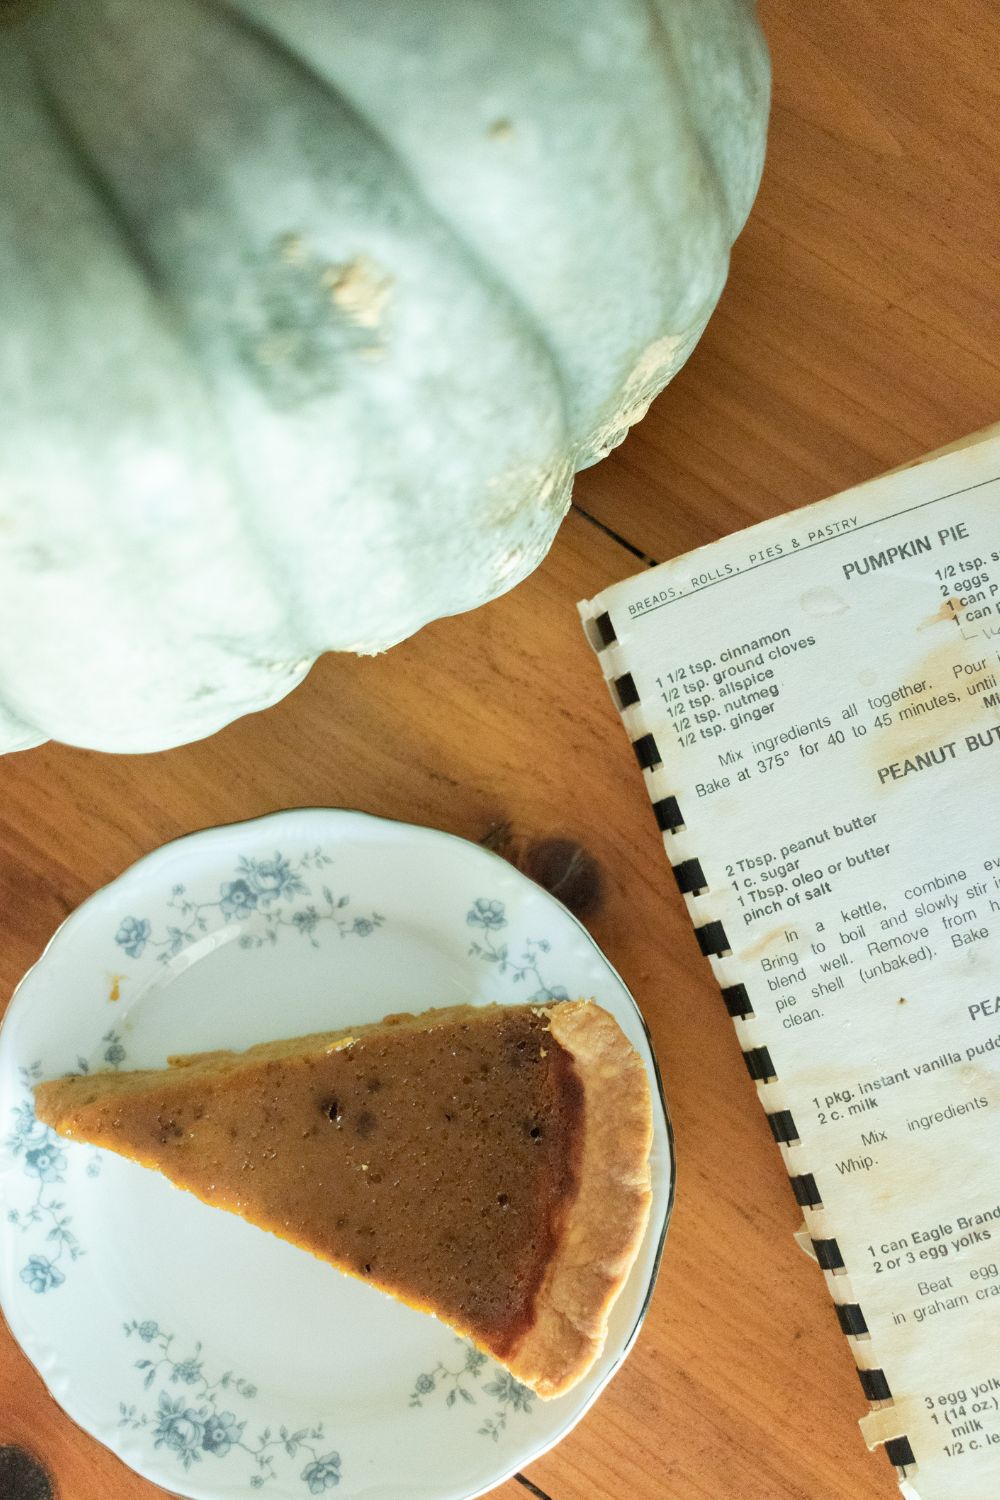 green jarahdel pumpkin, old community cookbook and a slice of pumpkin pie on a blue floral plate